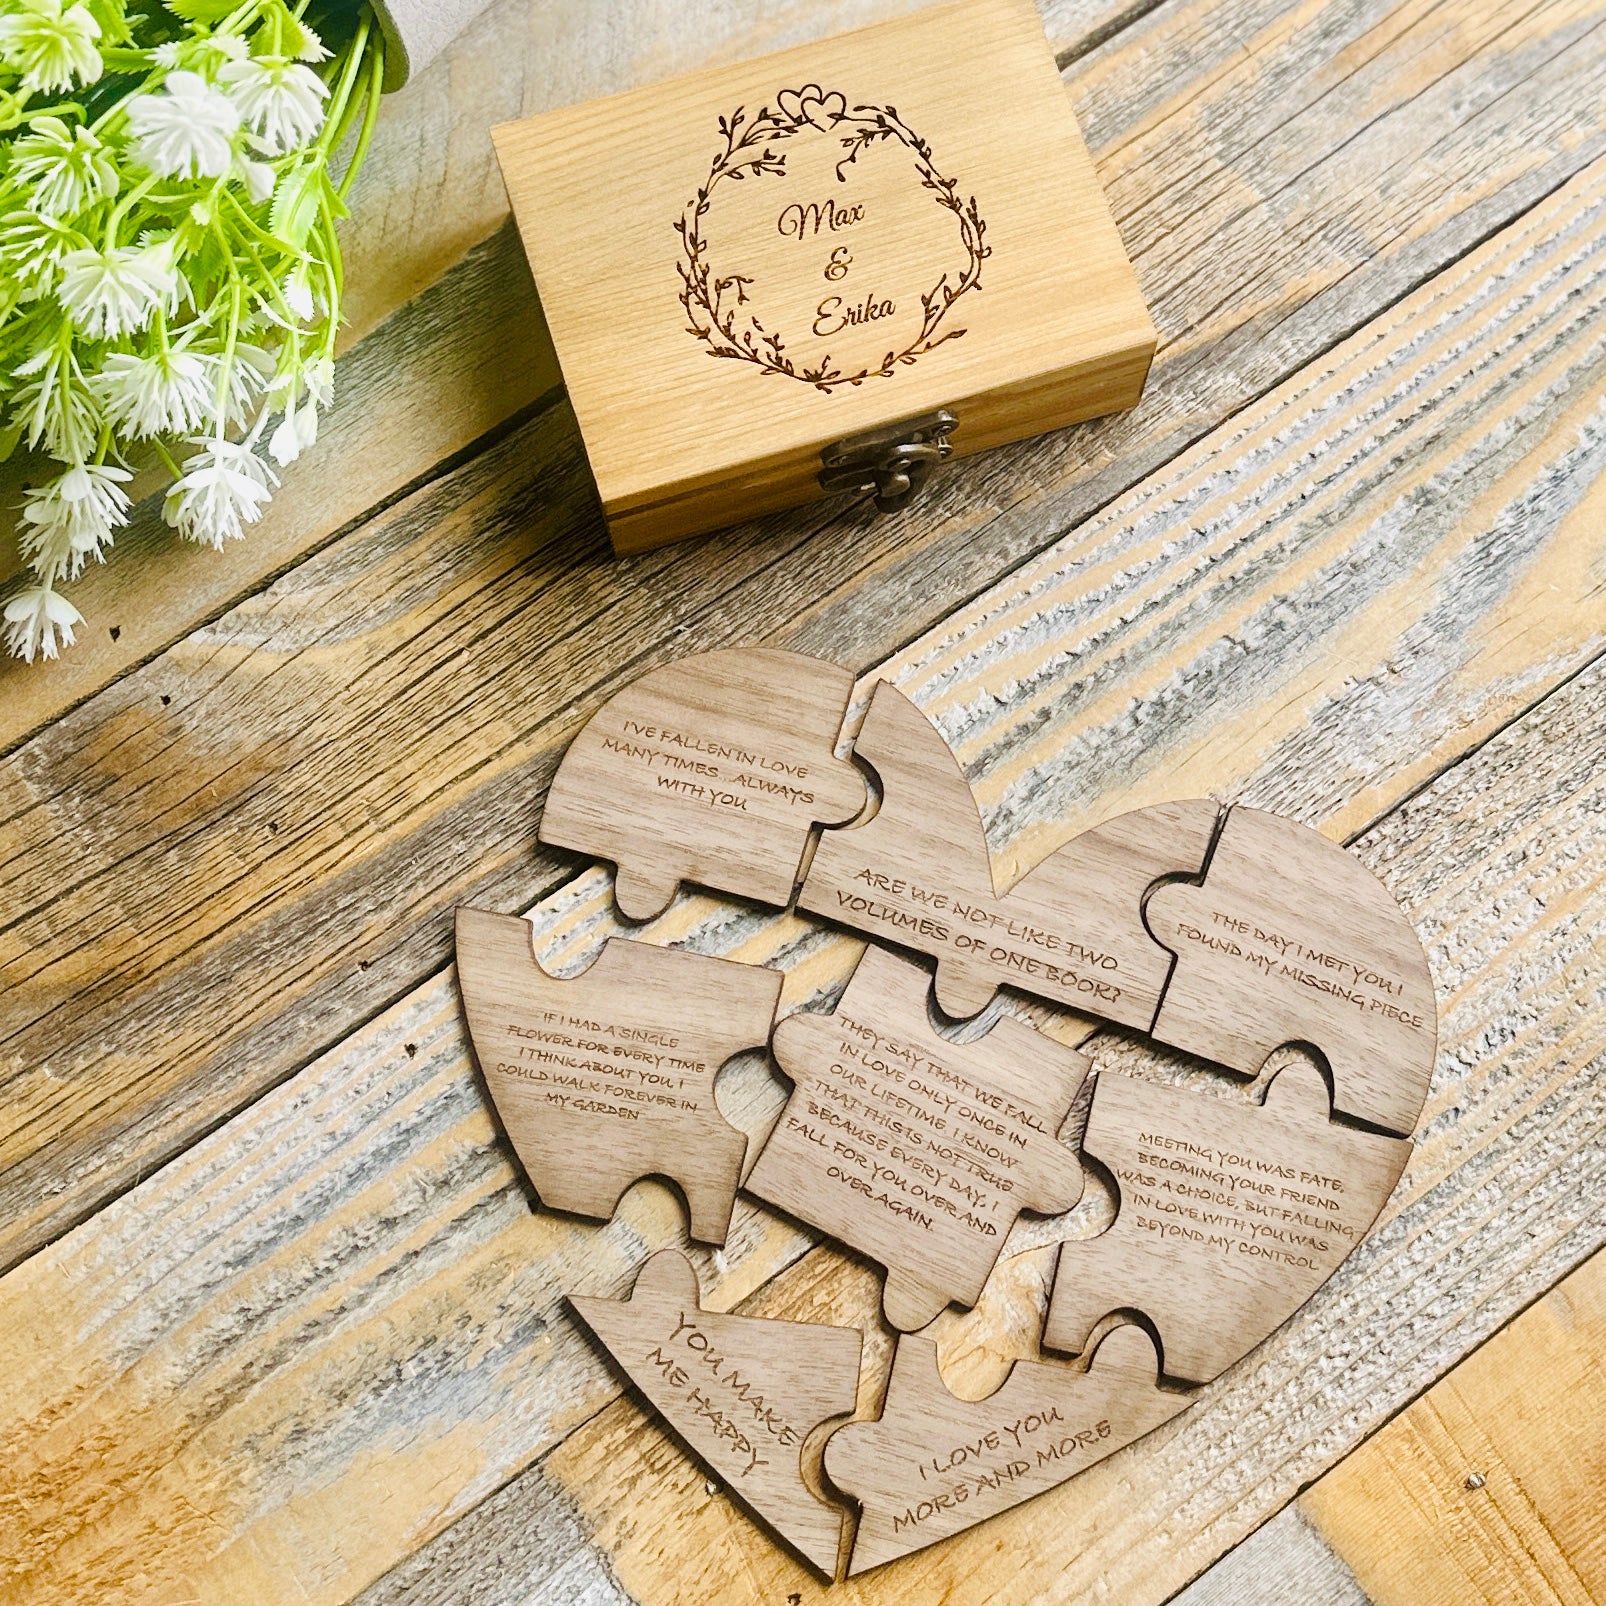 37 Incredibly Unique Wedding Gifts